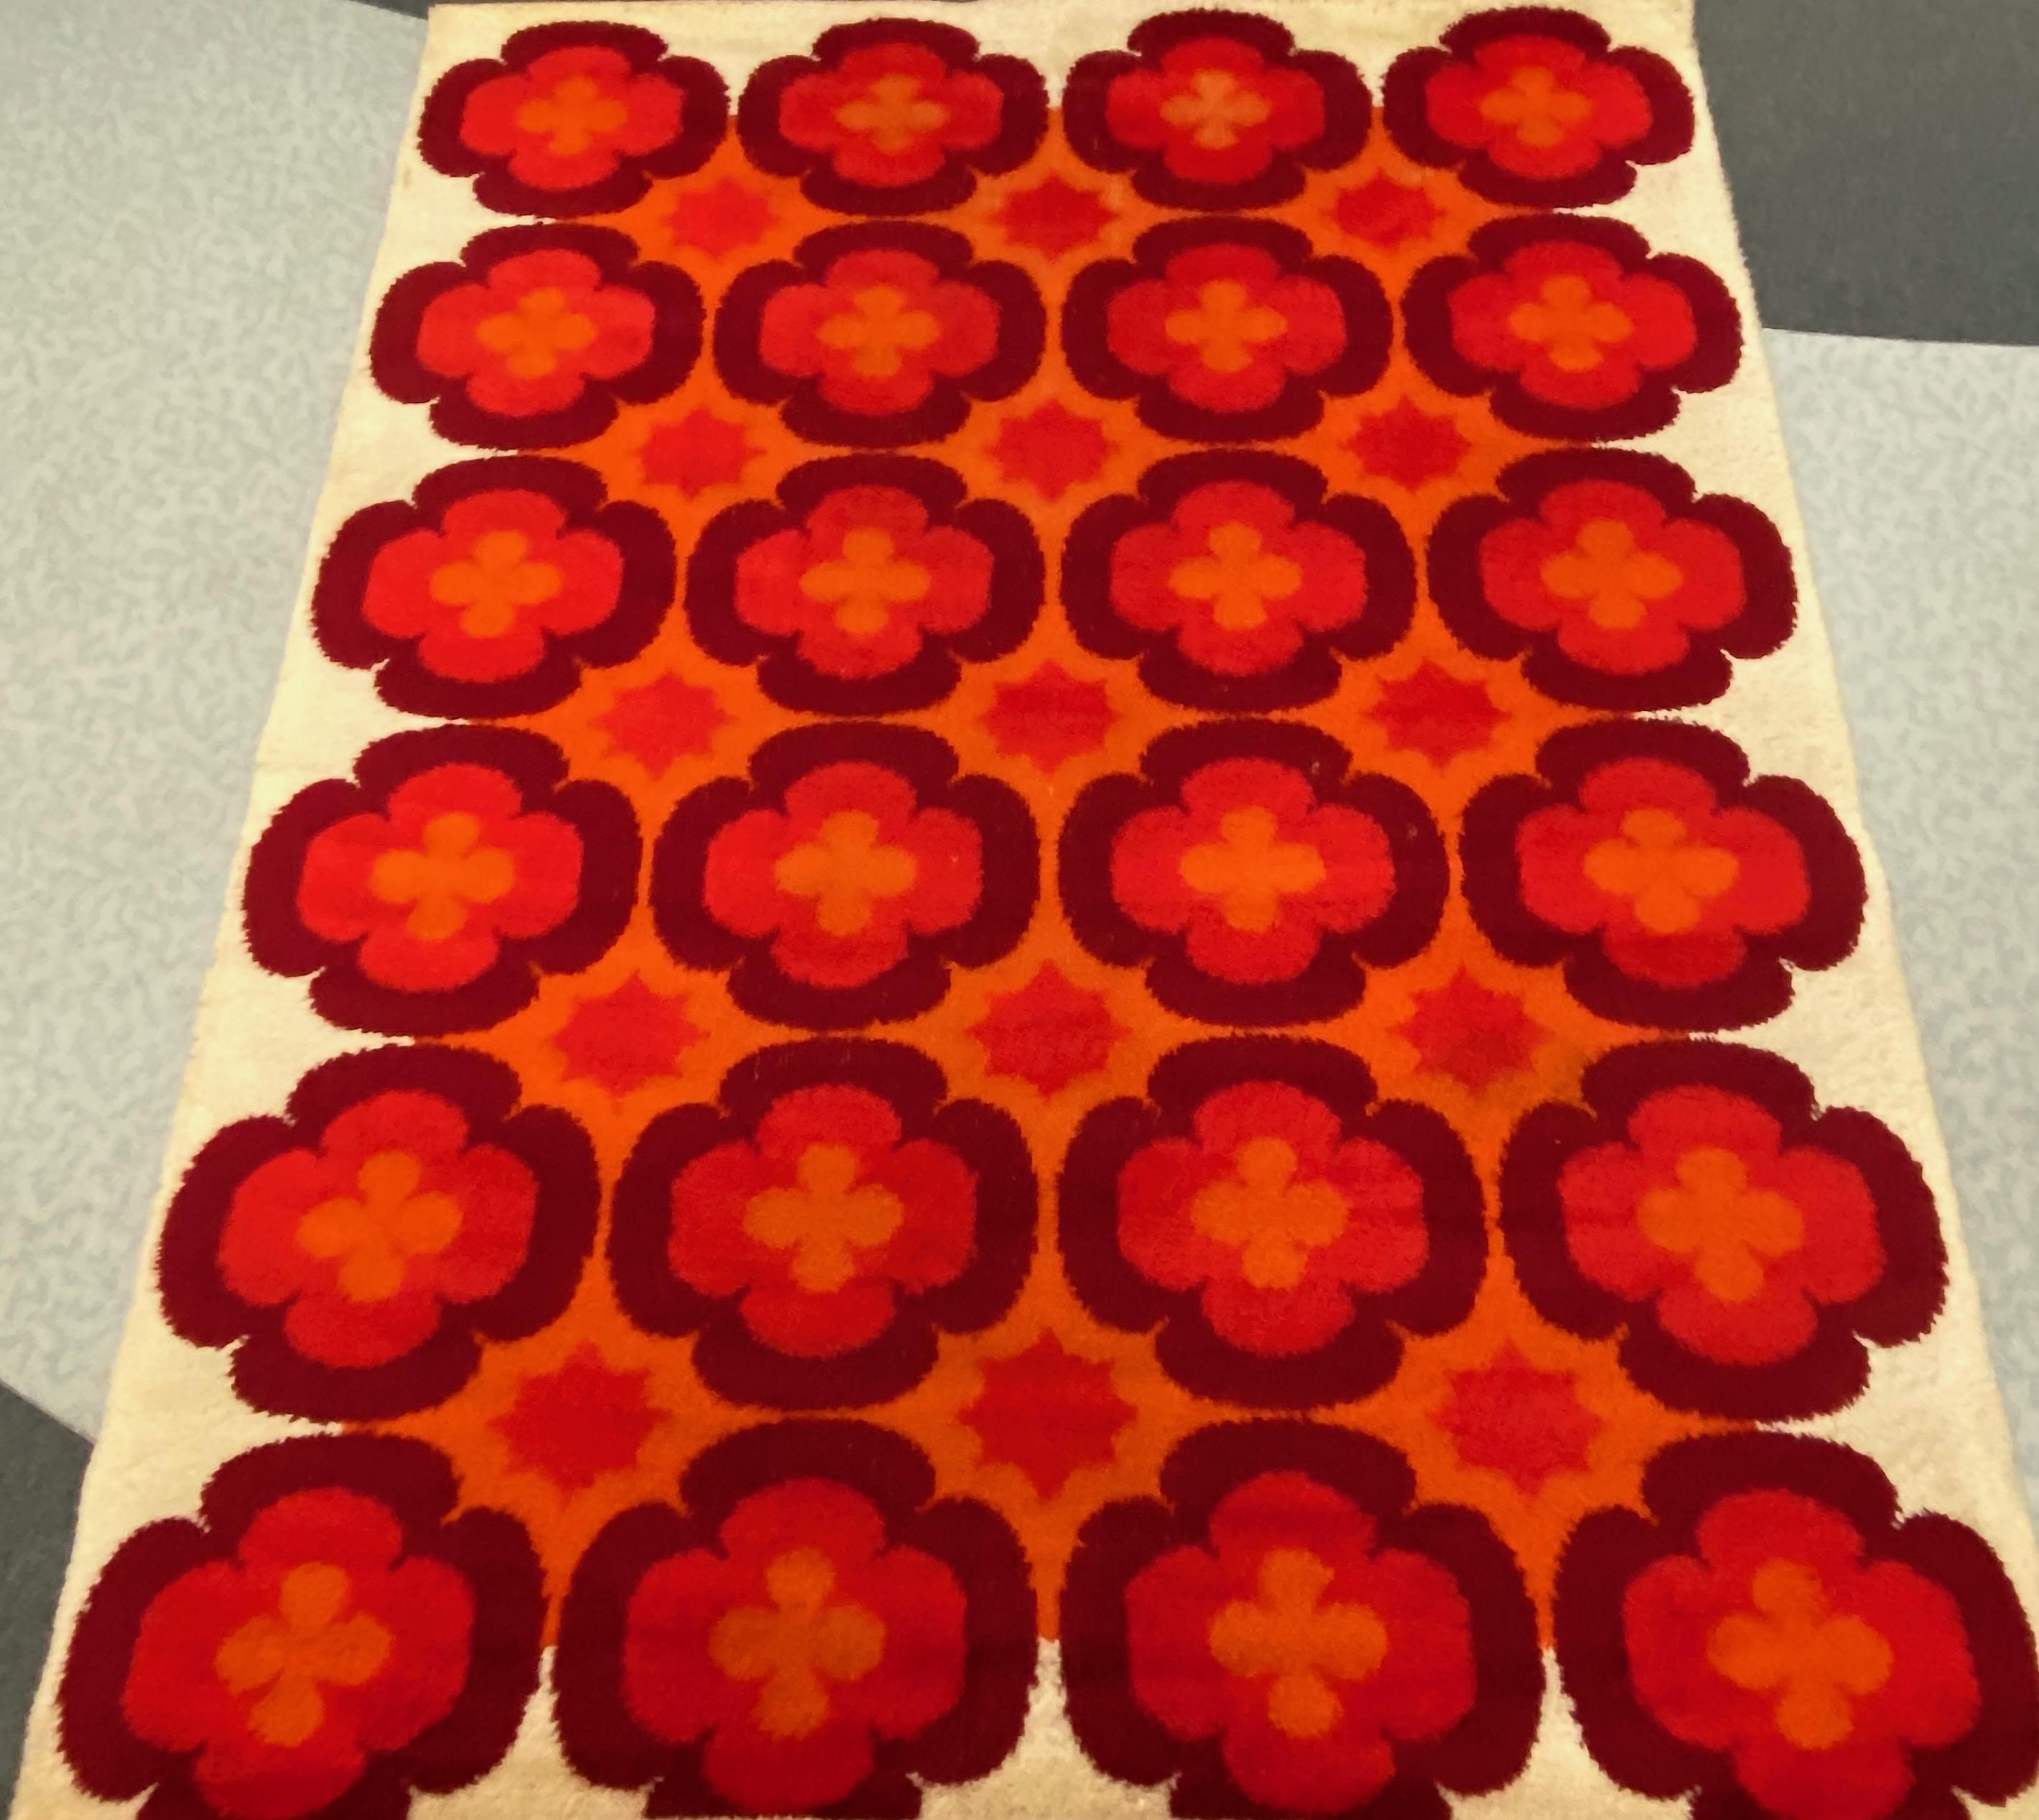 This rug is a great example of 1970s pop art interior. Made in high quality weaving technique. This high quality high pile rug was designed in the 1970s and manufactured in Germany. It is made from wool and it is still in a good vintage condition.